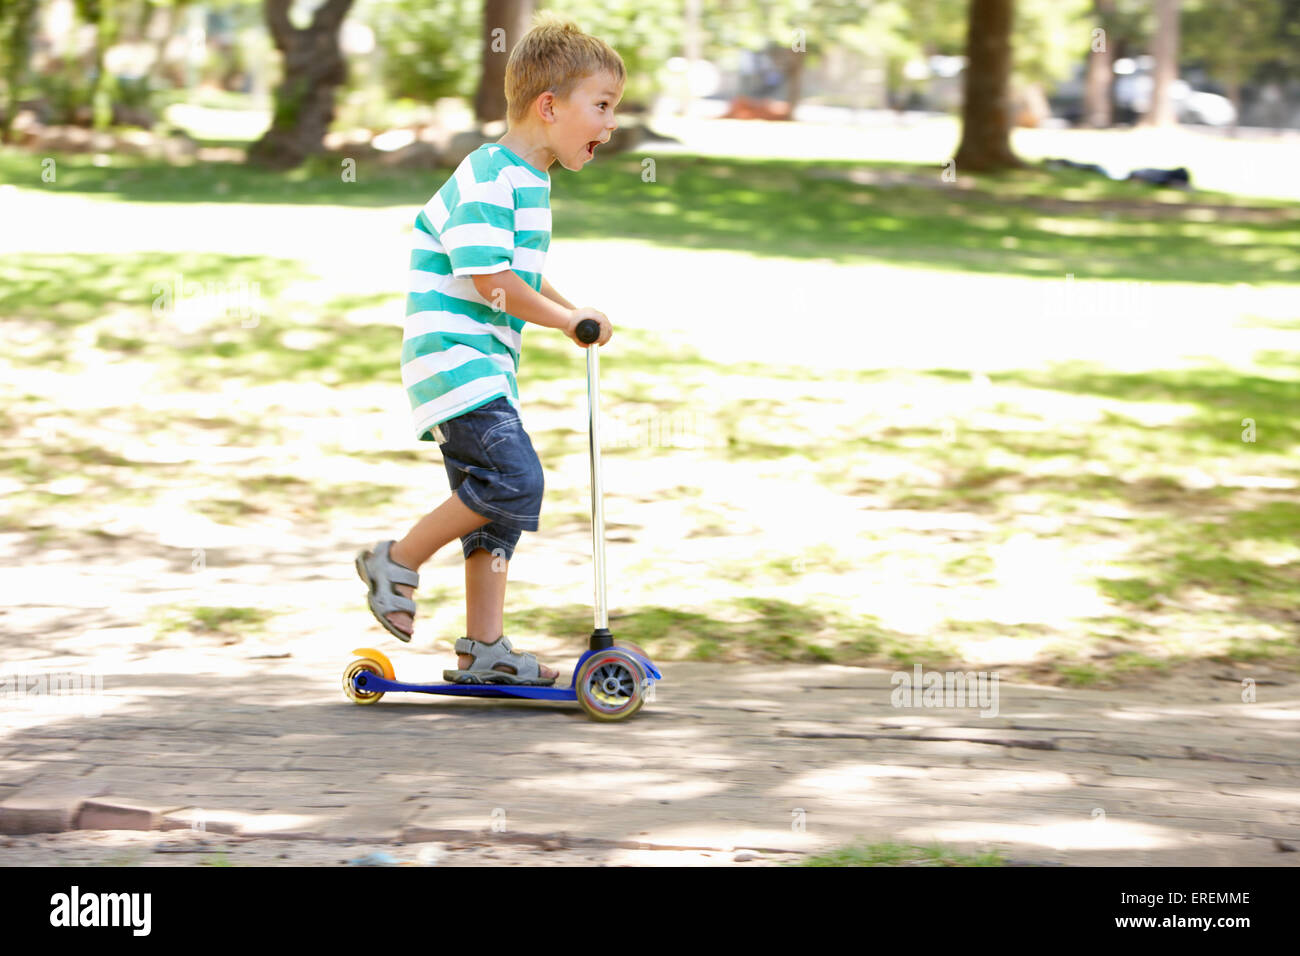 Young Boy On Scooter In Park Stock Photo